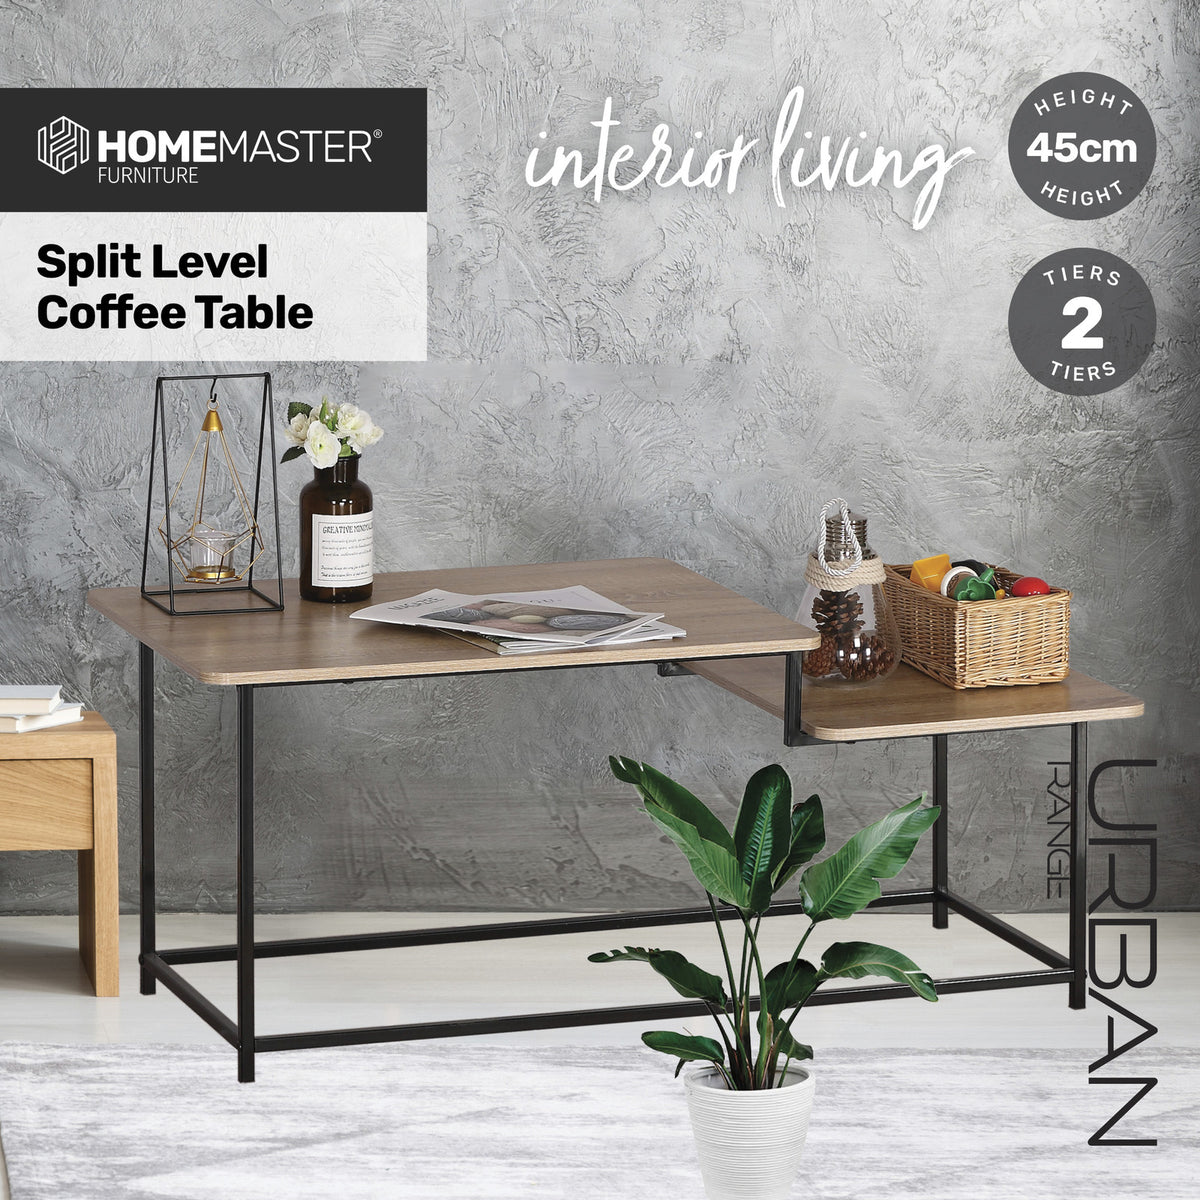 Home Master 2 Tier Coffee Table in Split Level Stylish - 1.09m - Notbrand